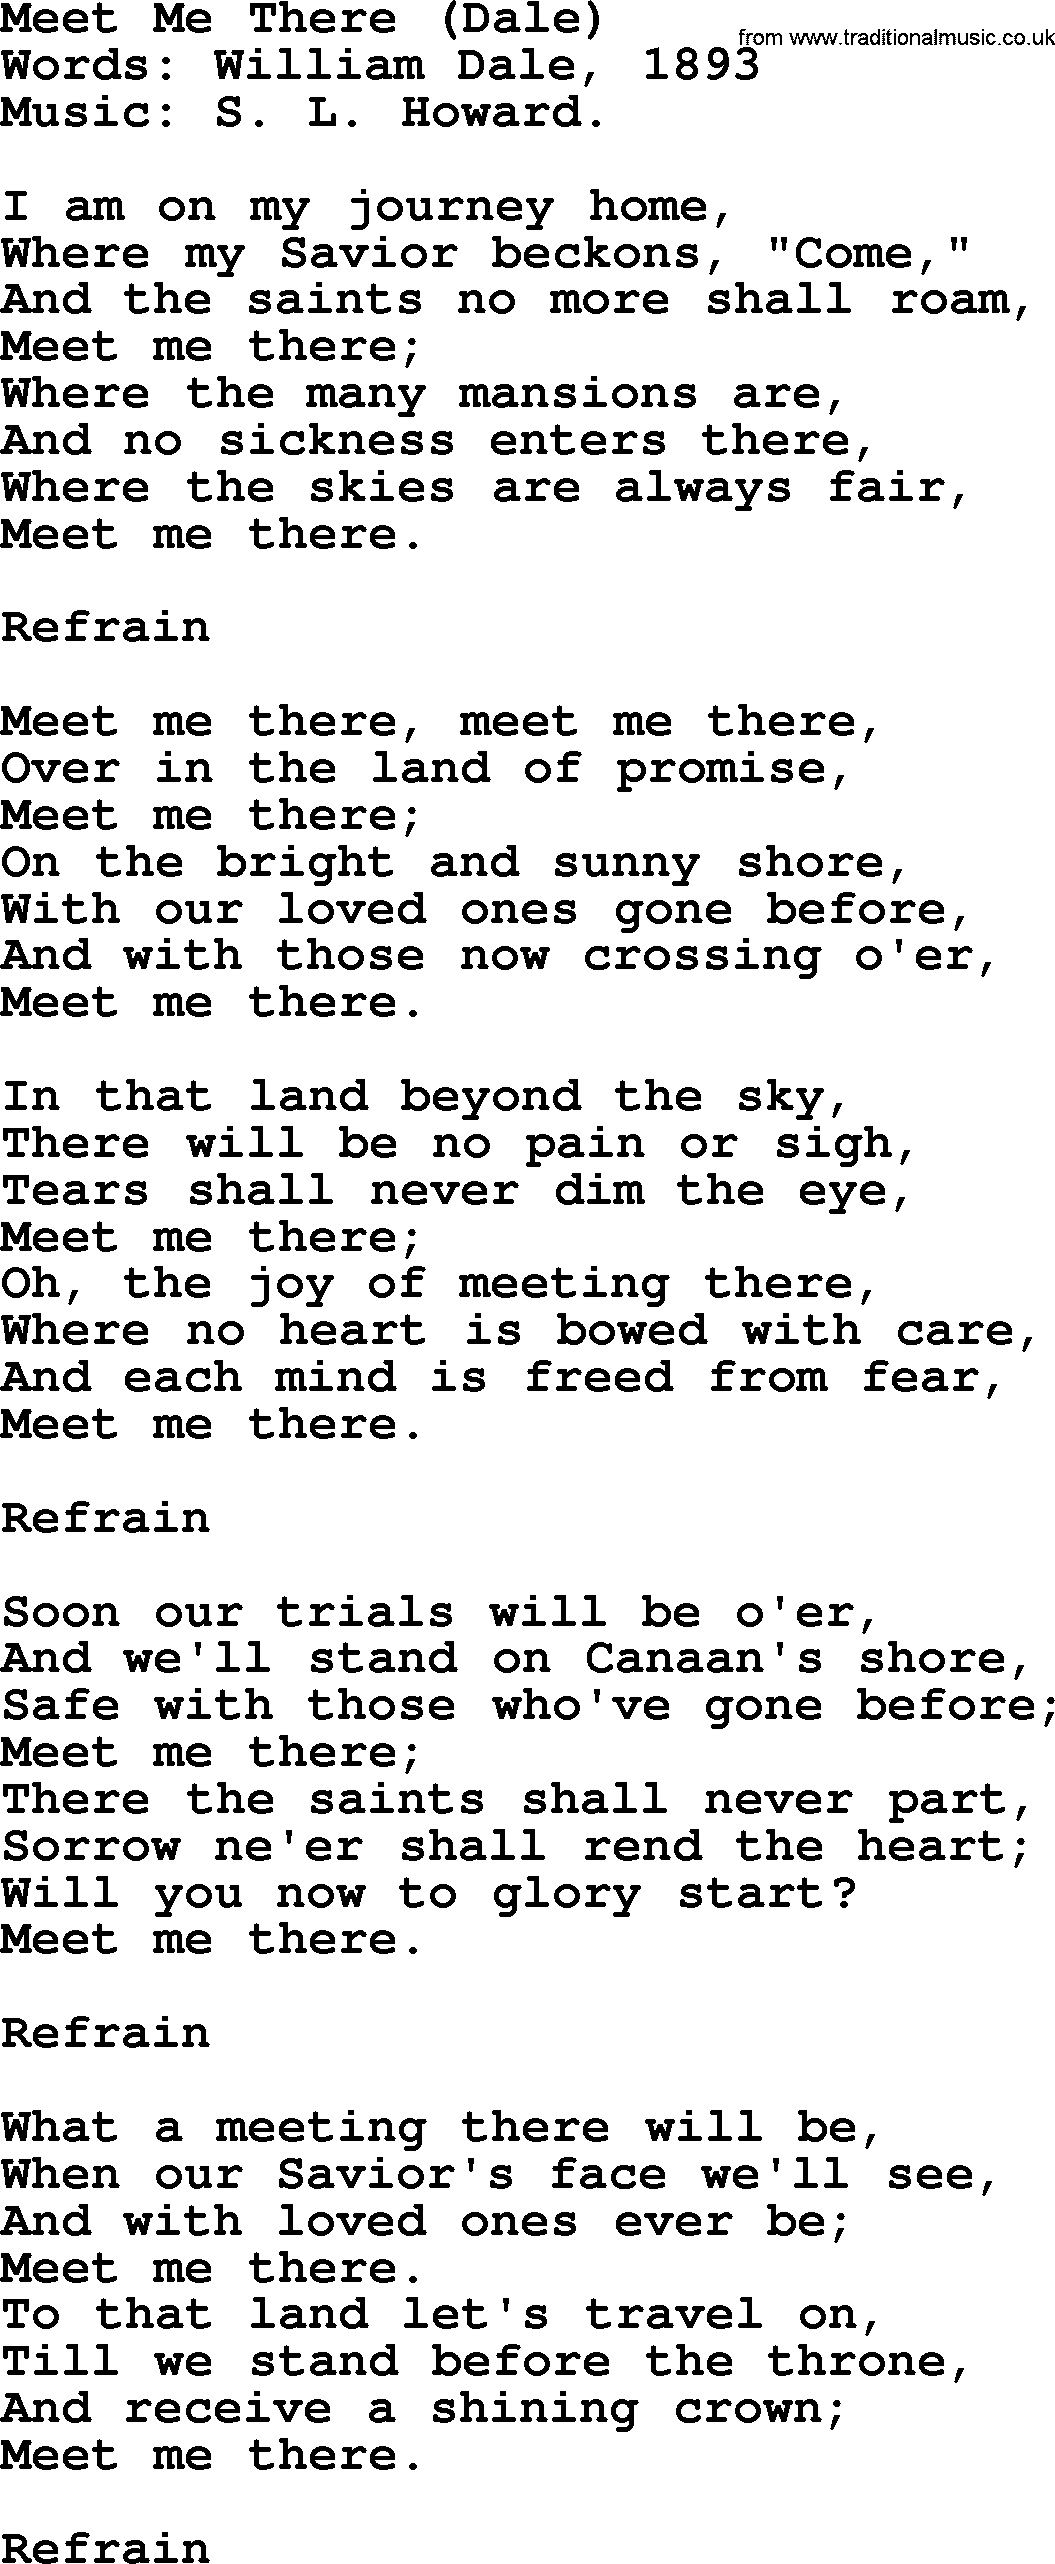 Songs and Hymns about Heaven: Meet Me There (dale) lyrics with PDF